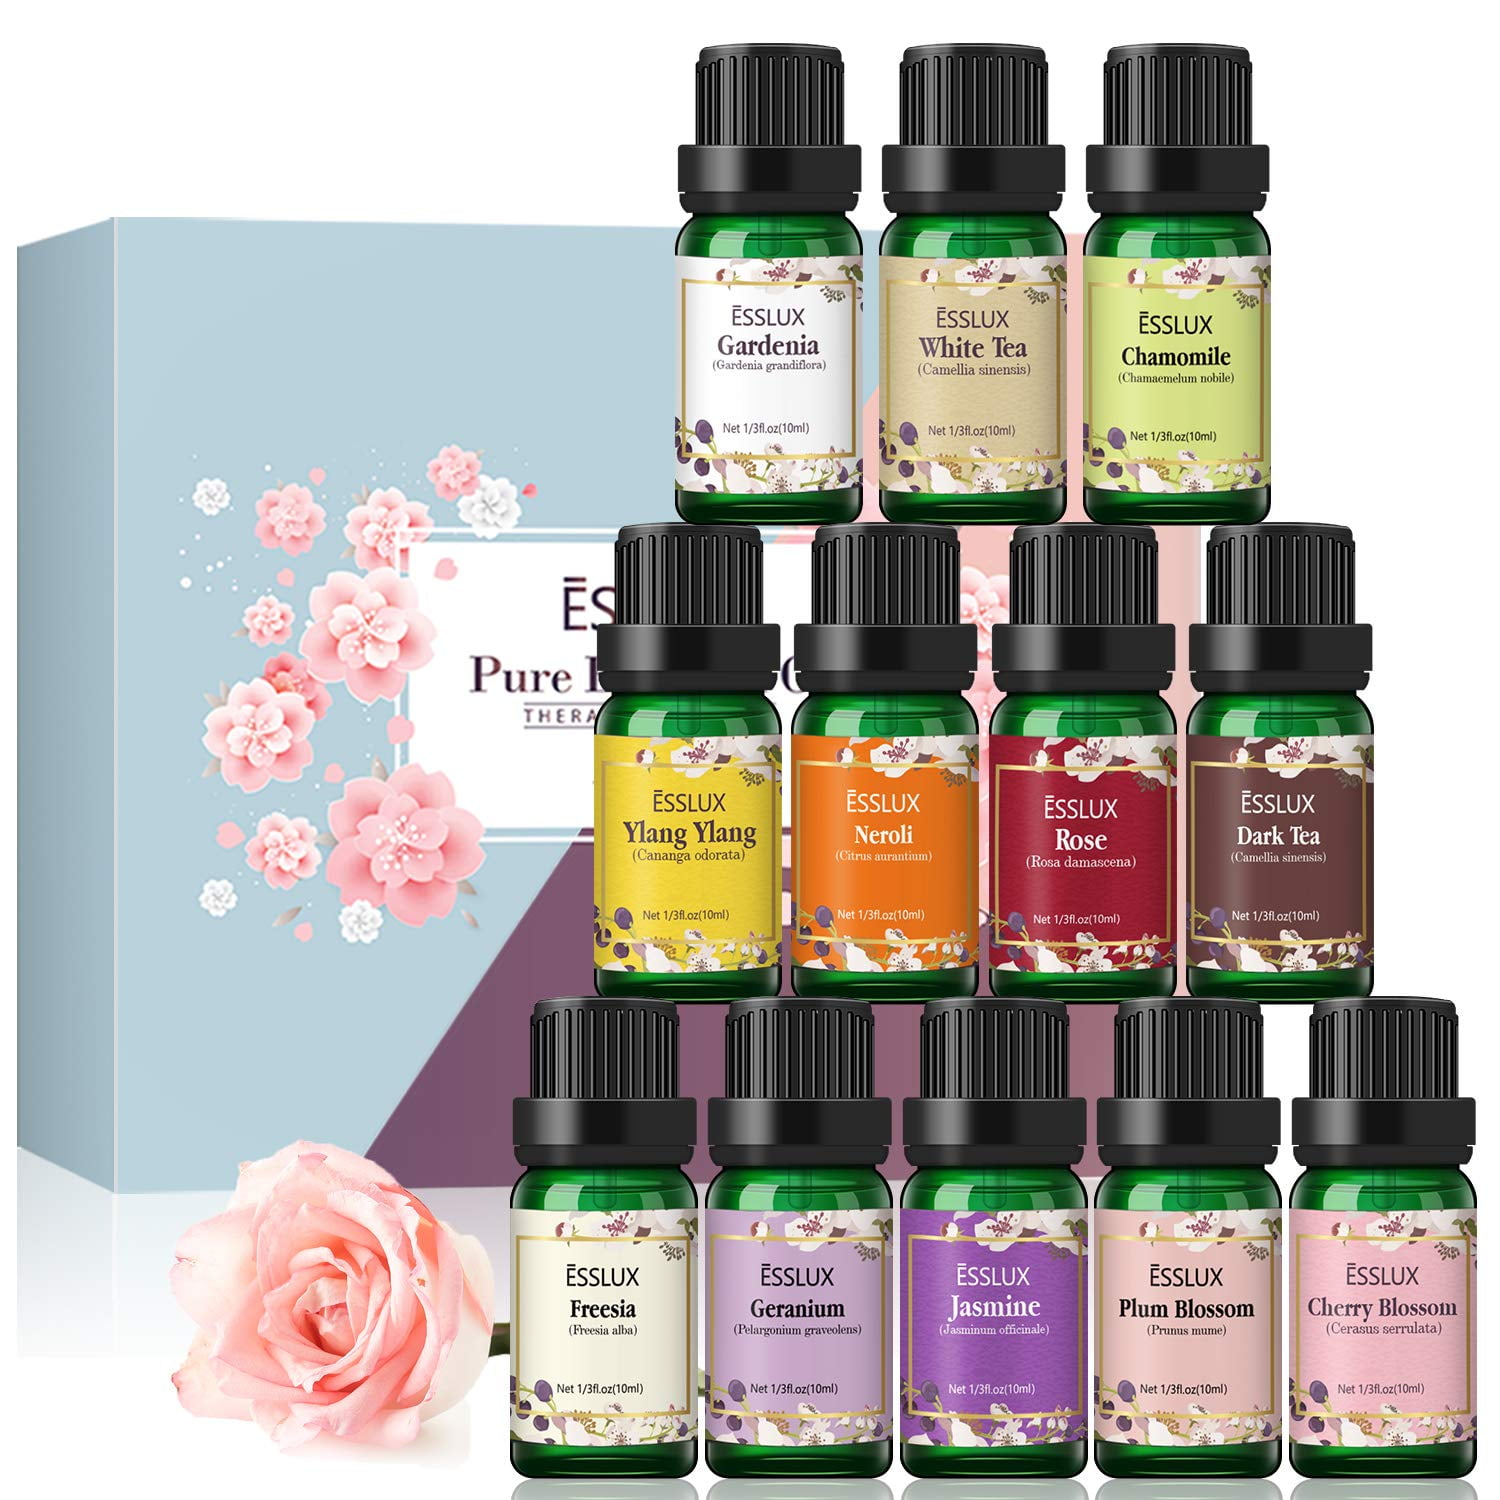 EUQEE Floral Essential Oils Set of 6 Pure Essential Oil Gift Set for  Diffusers, Soap & Candle Making - Lavender, Rose, Ylang Ylang, Jasmine,  Geranium